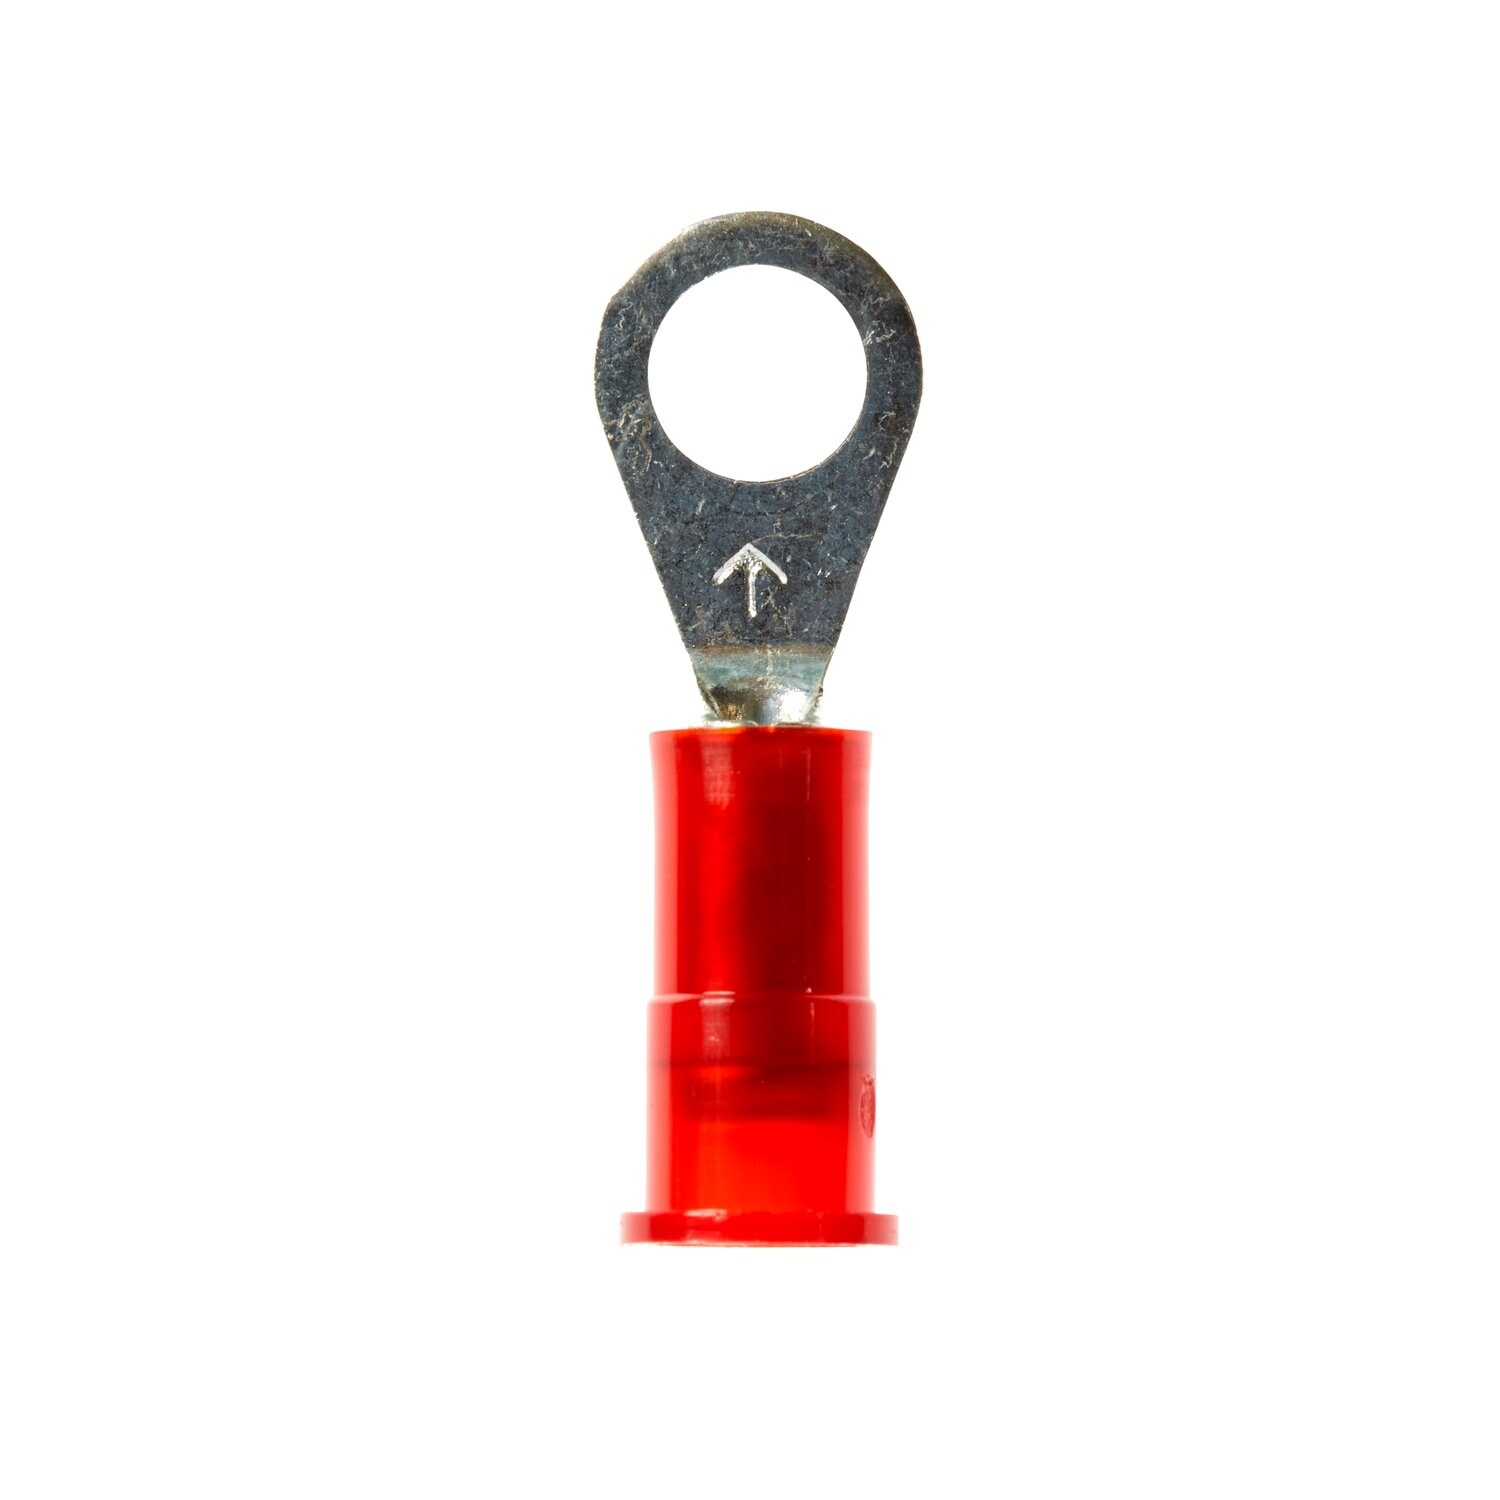 7000133273 - 3M Scotchlok Ring Nylon Insulated, 100/bottle, MNG18-8R/LX,
standard-style ring tongue fits around the stud, 500/Case